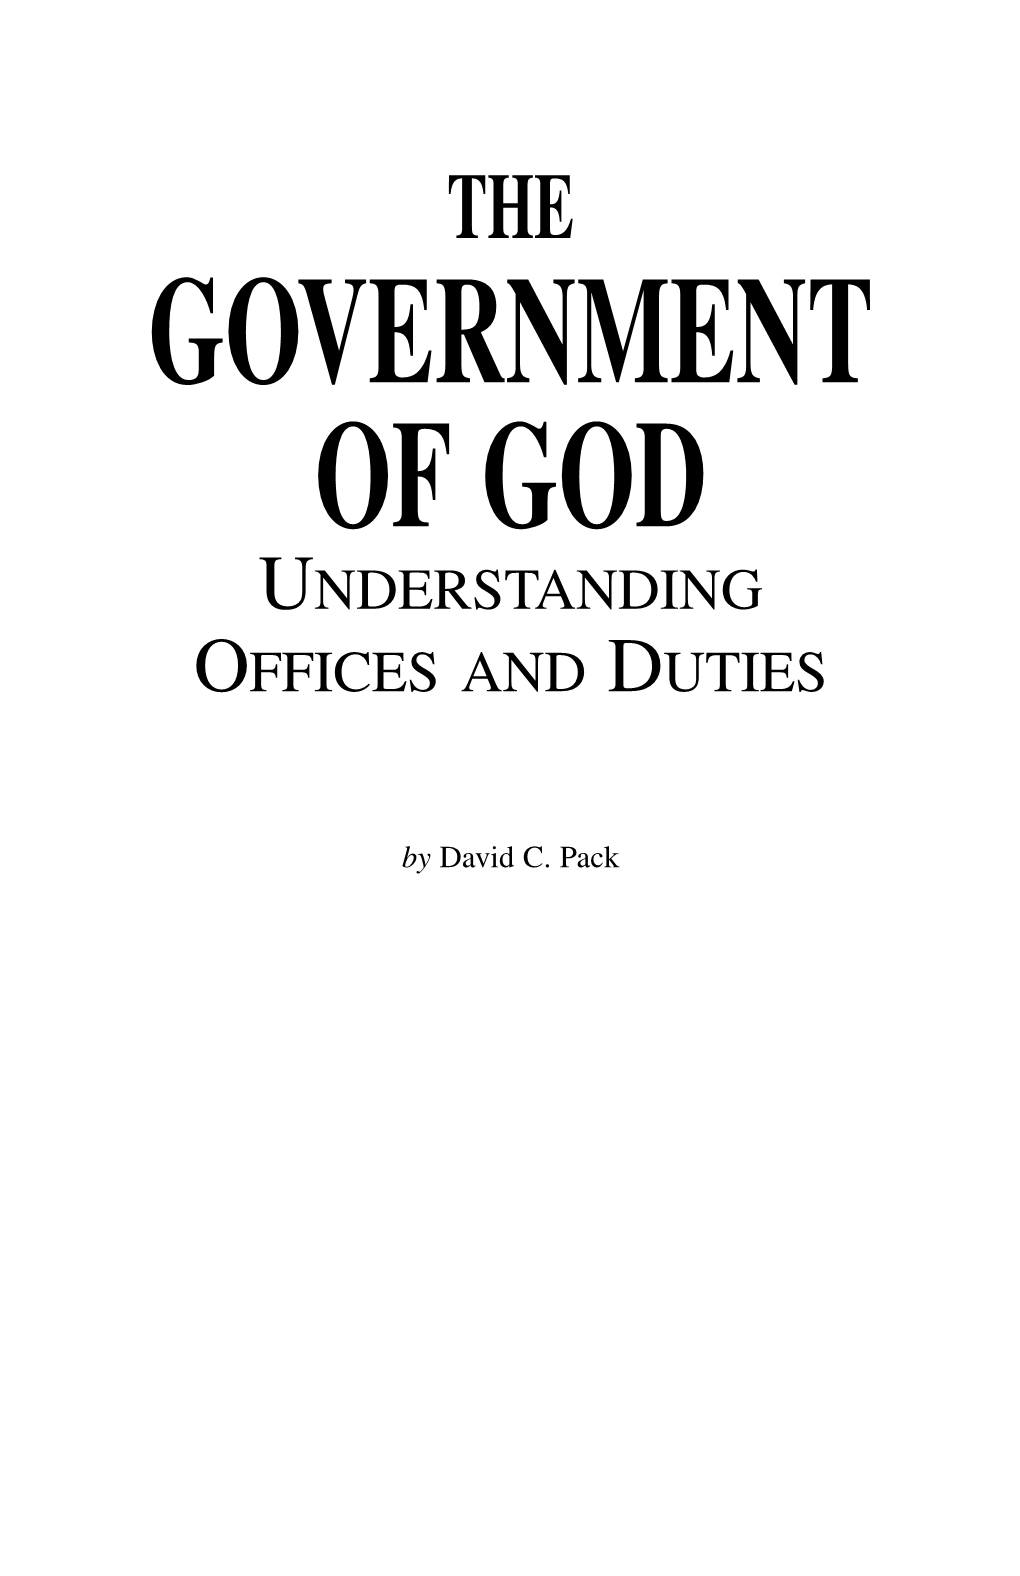 The Government of God – Understanding Offices and Duties